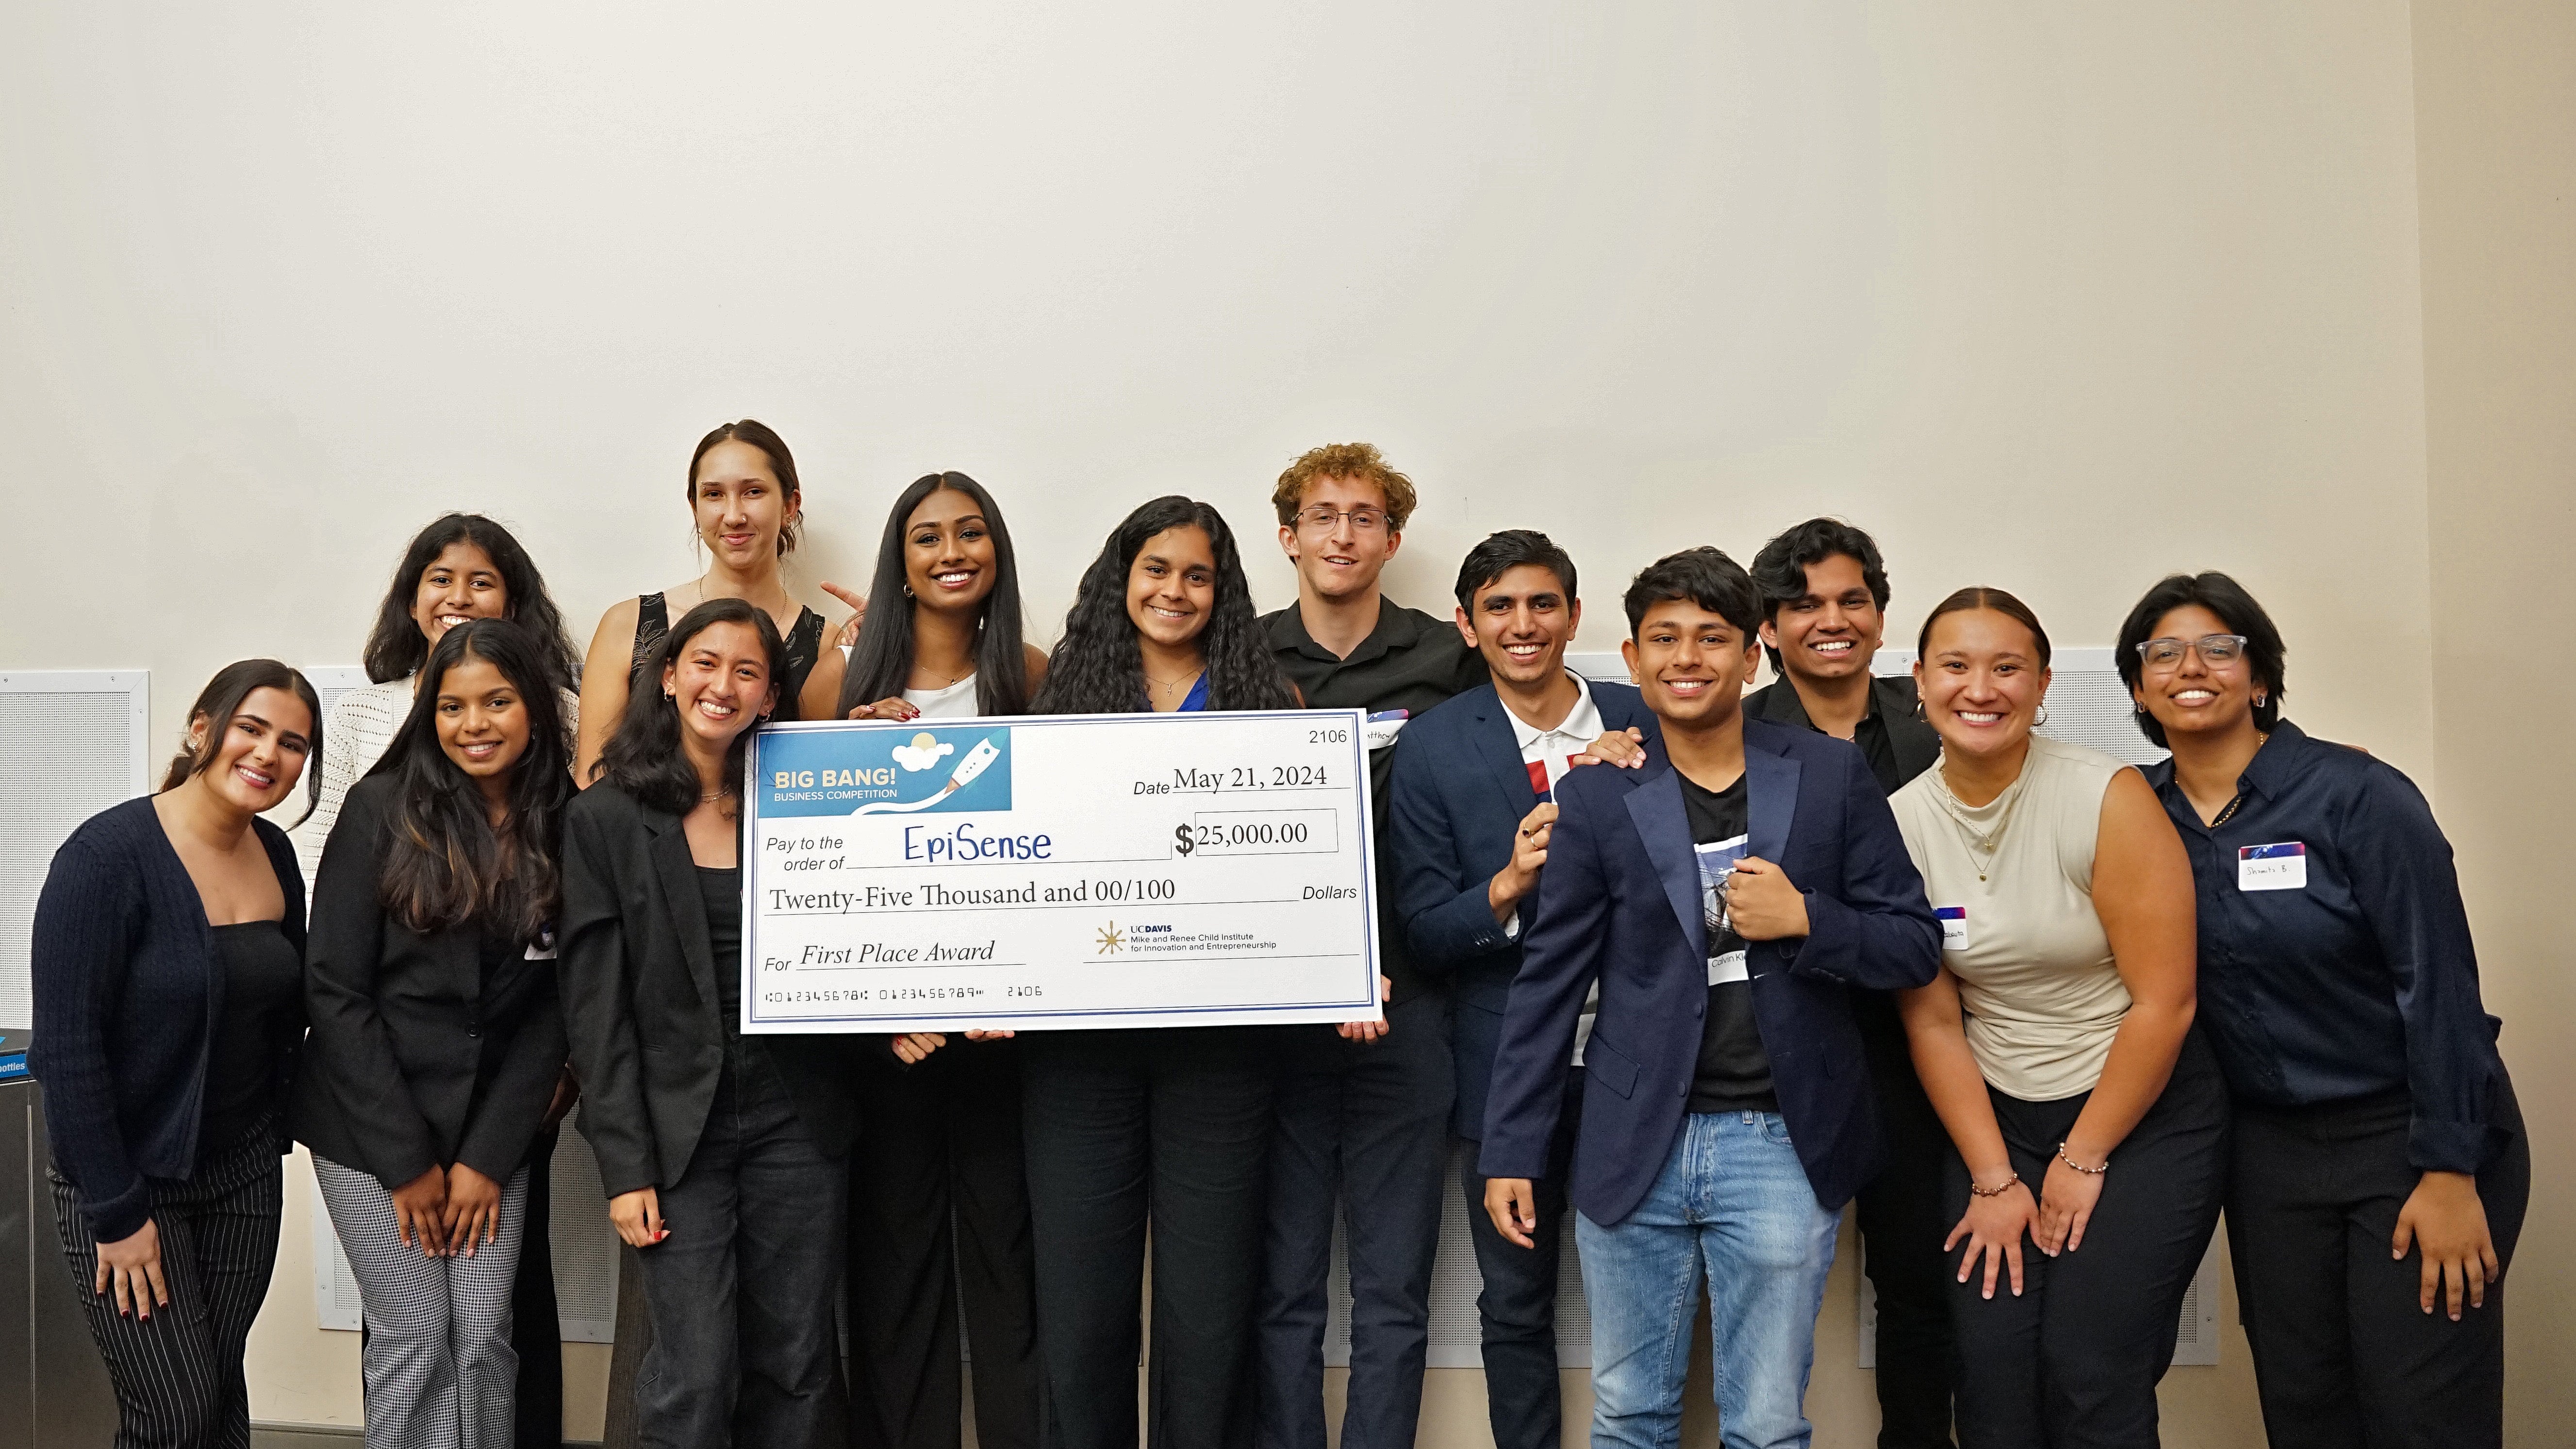 Students who were finalists in Big Bang! stand in a photo together holding an artifical large check.